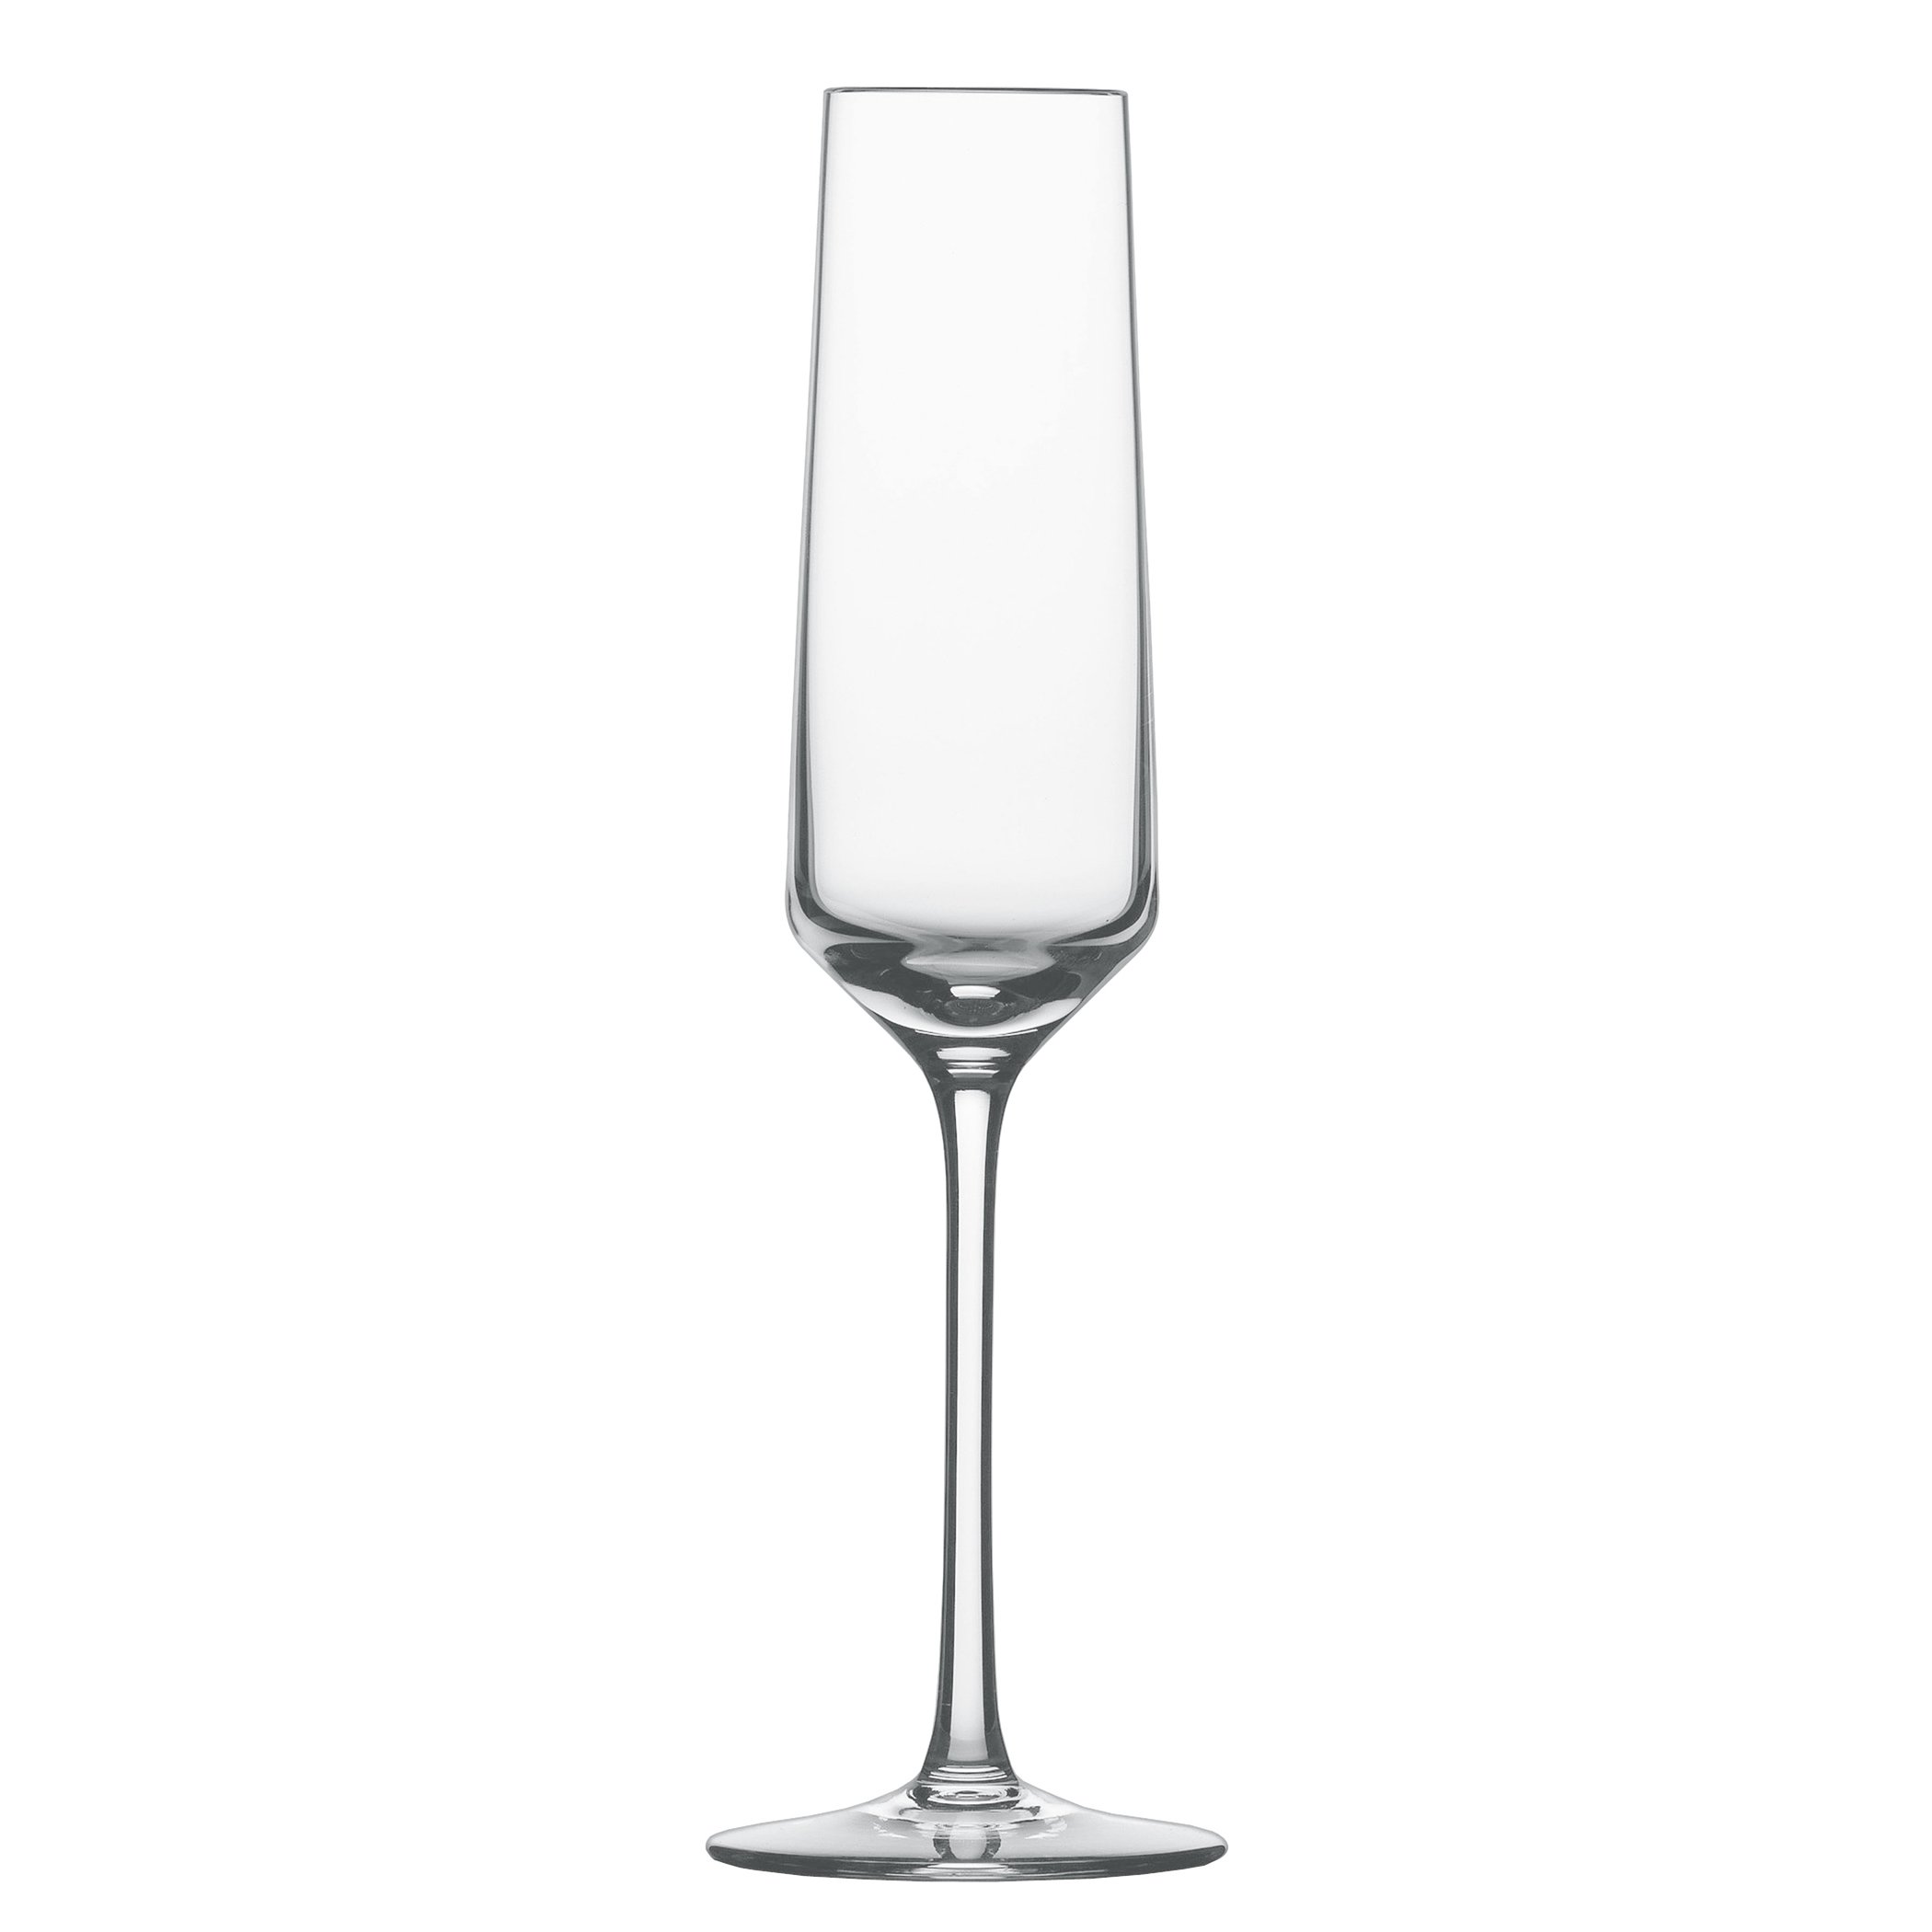 Schott Zwiesel Tritan Crystal Glass Pure Stemware Collection Champagne Flute with Effervescence Points, 7.3-Ounce, Set of 4